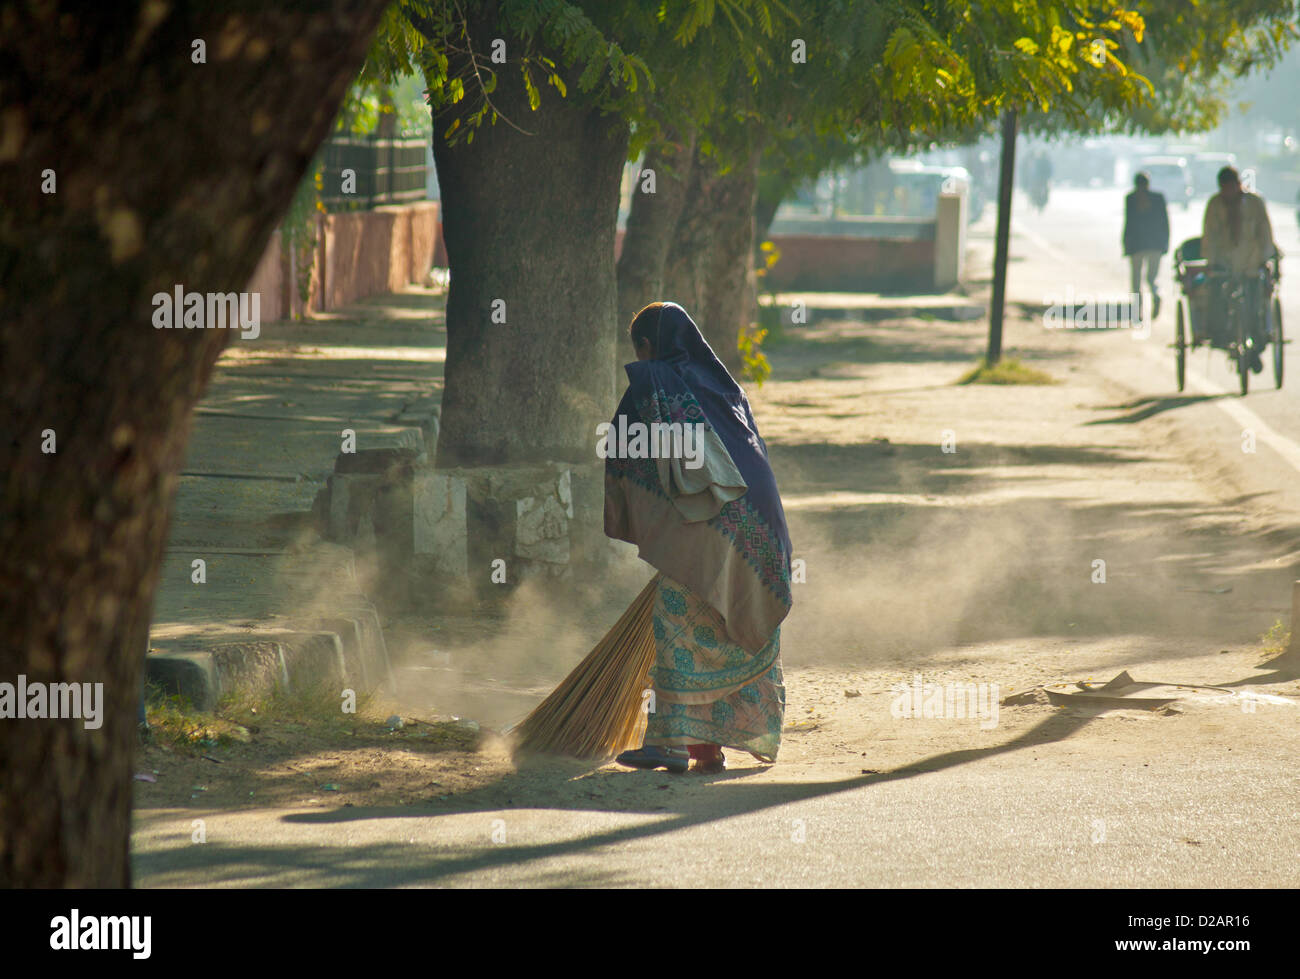 DUST FROM THE SWEEPERS BROOM AS SHE CLEARS THE DEBRIS FROM THE PAVEMENT JAIPUR RAJASTHAN INDIA Stock Photo